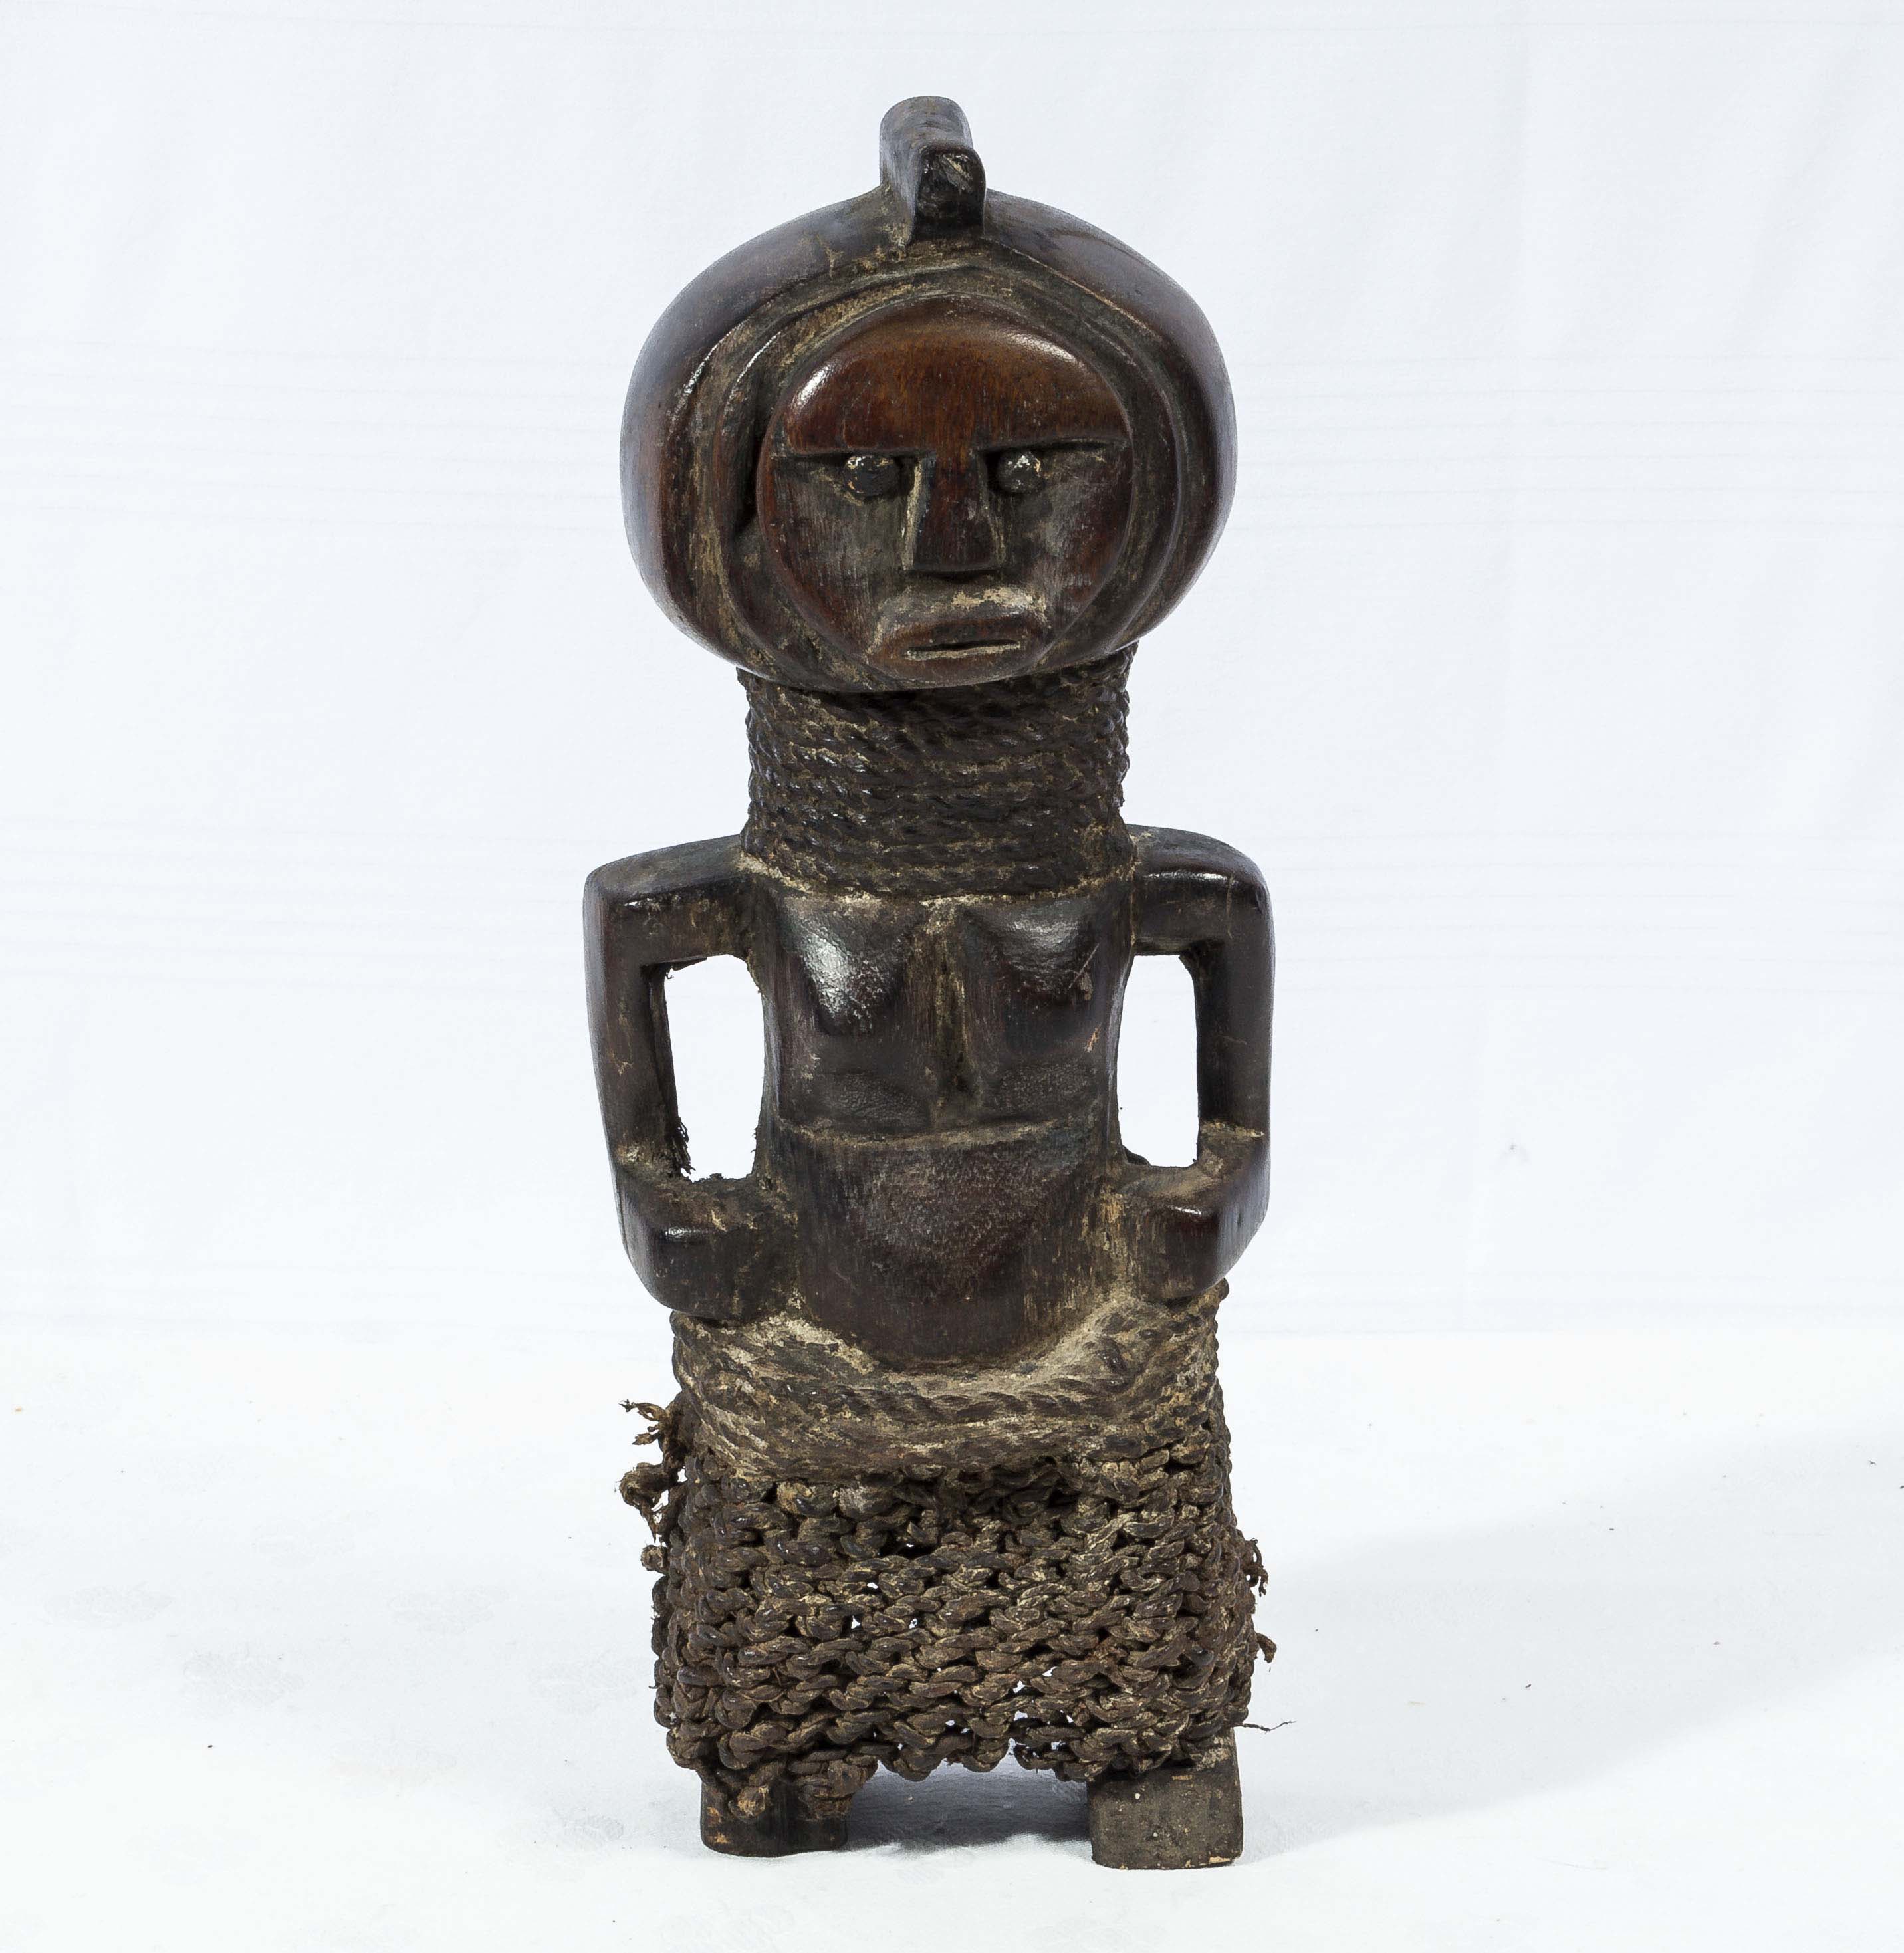 Small West African fertility figure with natural fibre skirt and necklace early 20th century